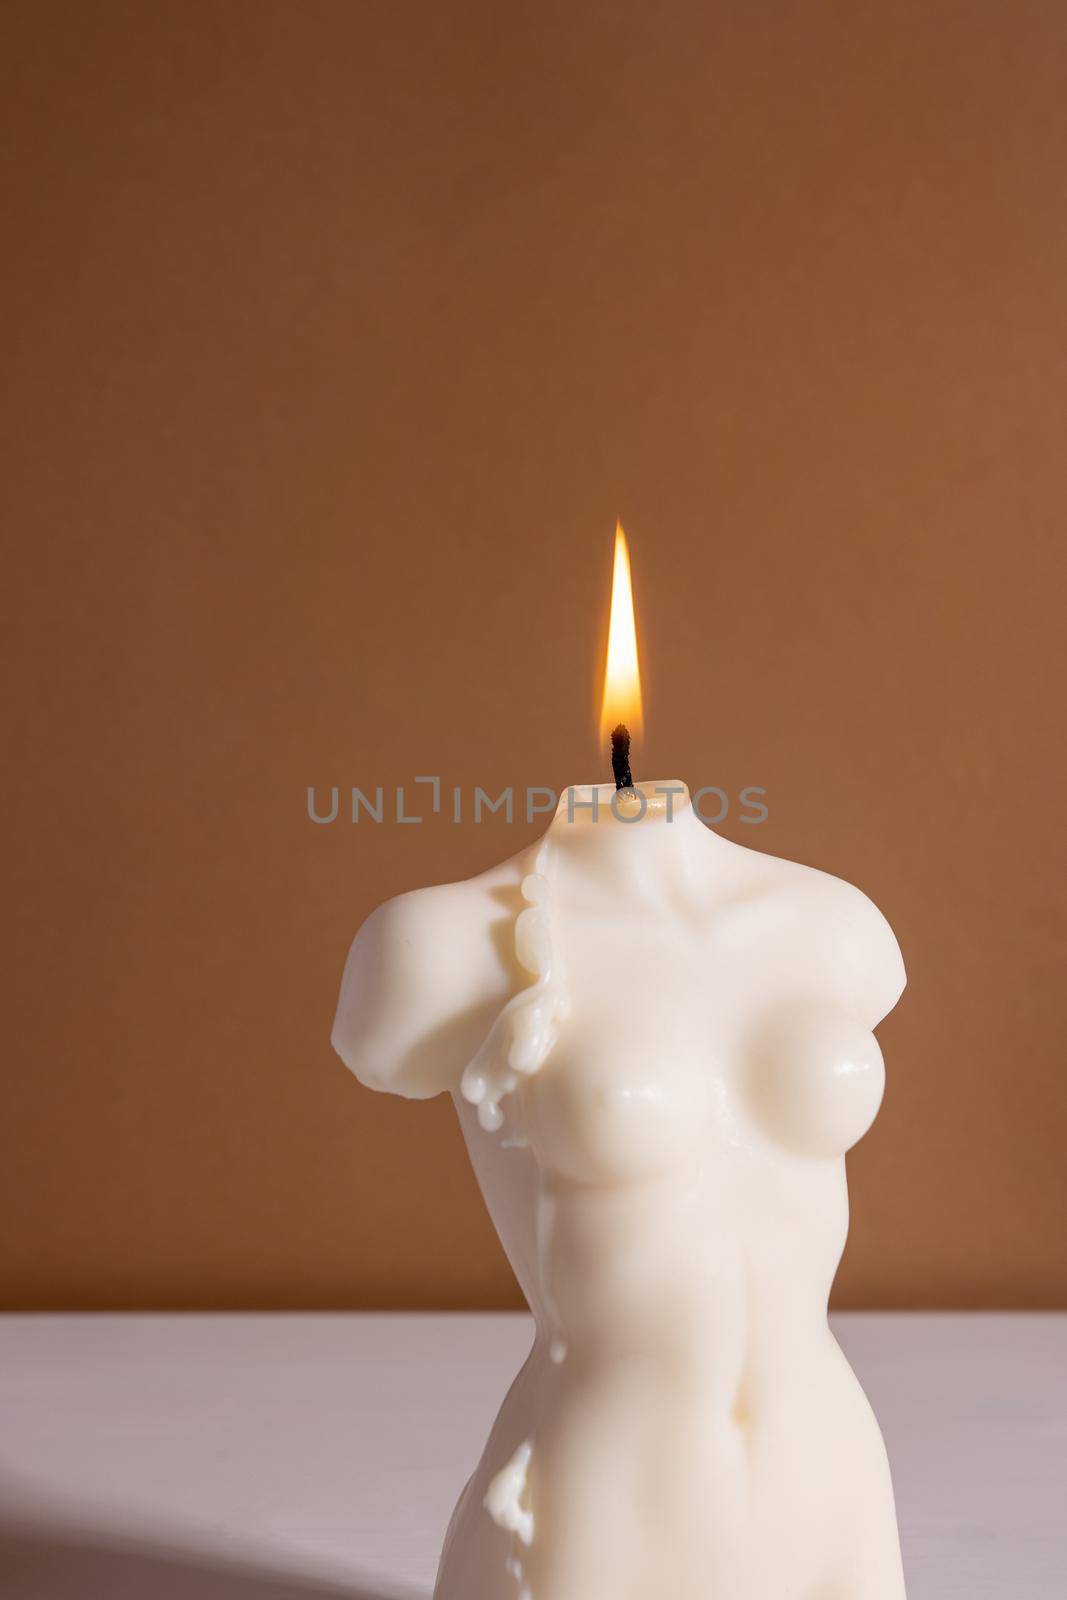 Candle in woman torso shape in brown interior with stone and dried flowers, autumn atmosphere by katrinaera